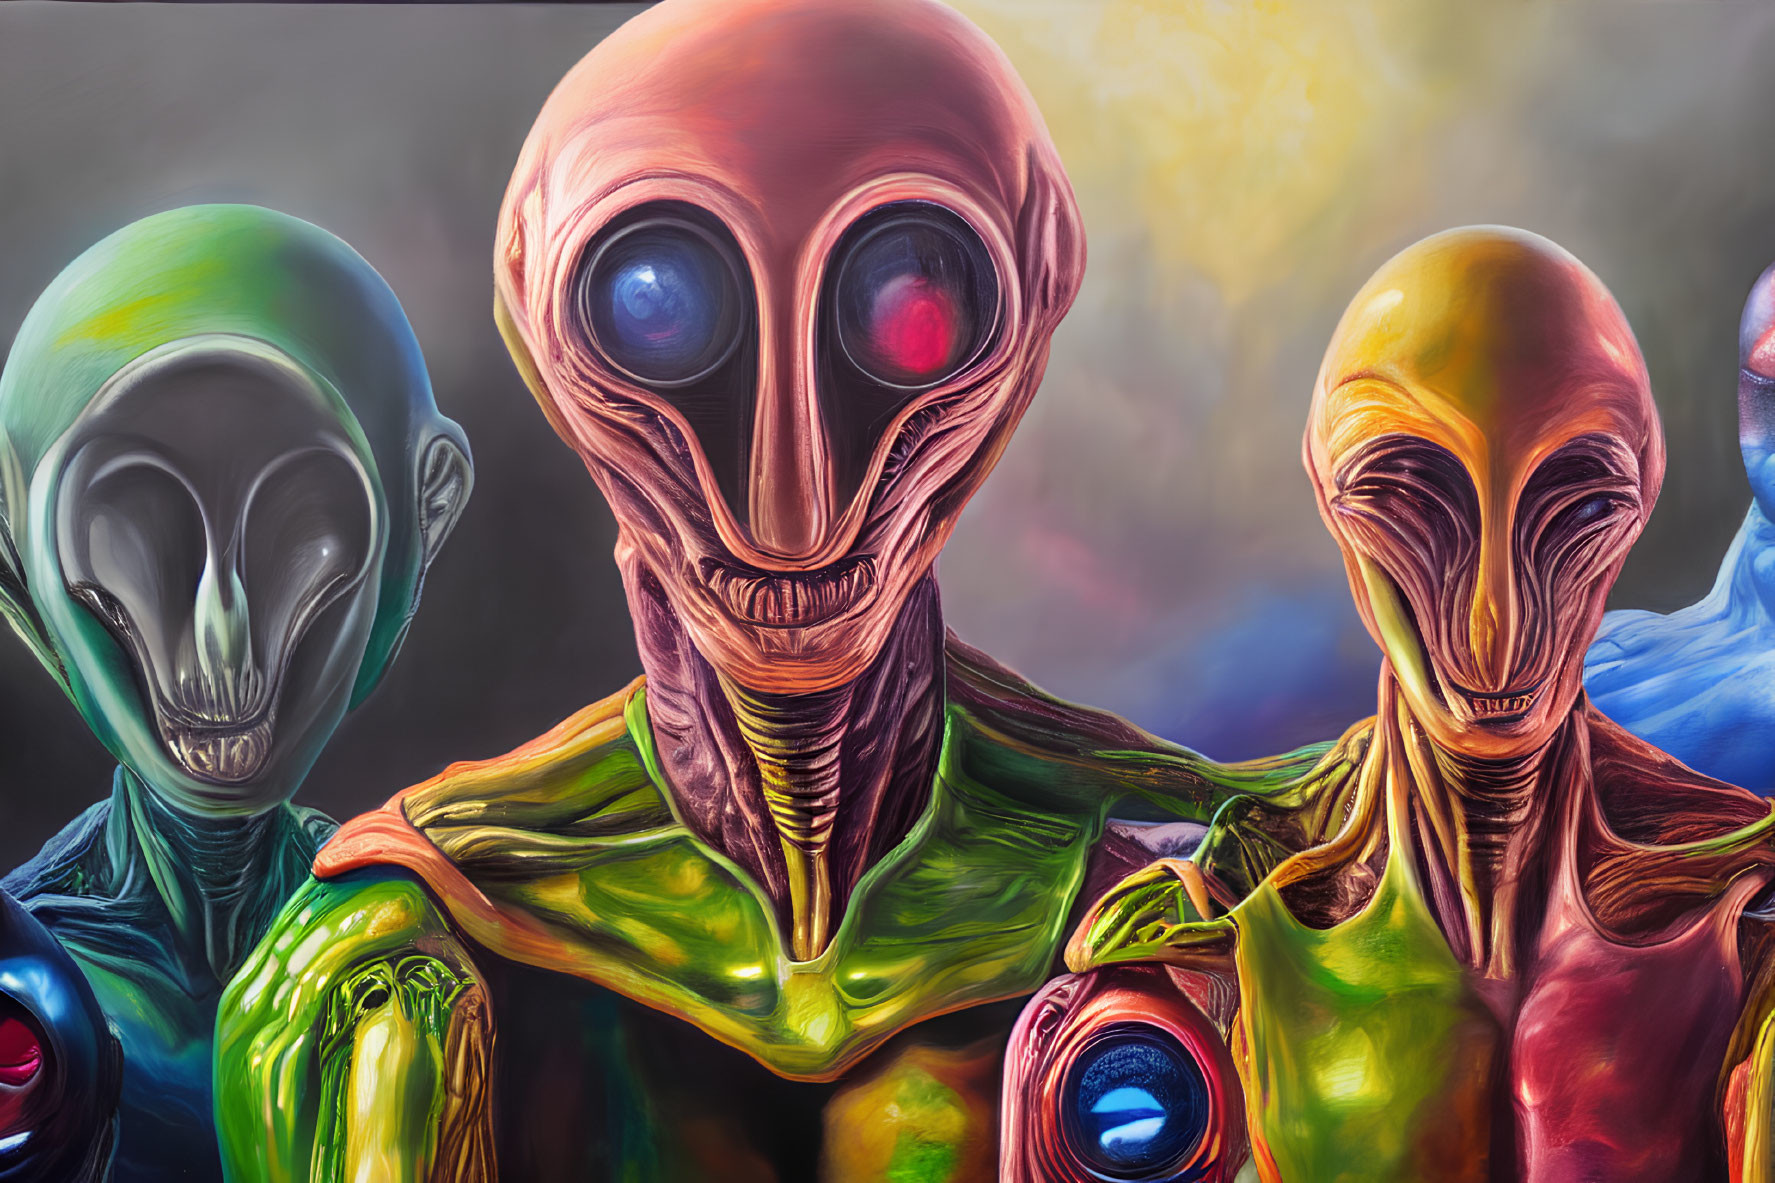 Colorful surreal painting: Four humanoid alien figures with large eyes and elongated heads on abstract background